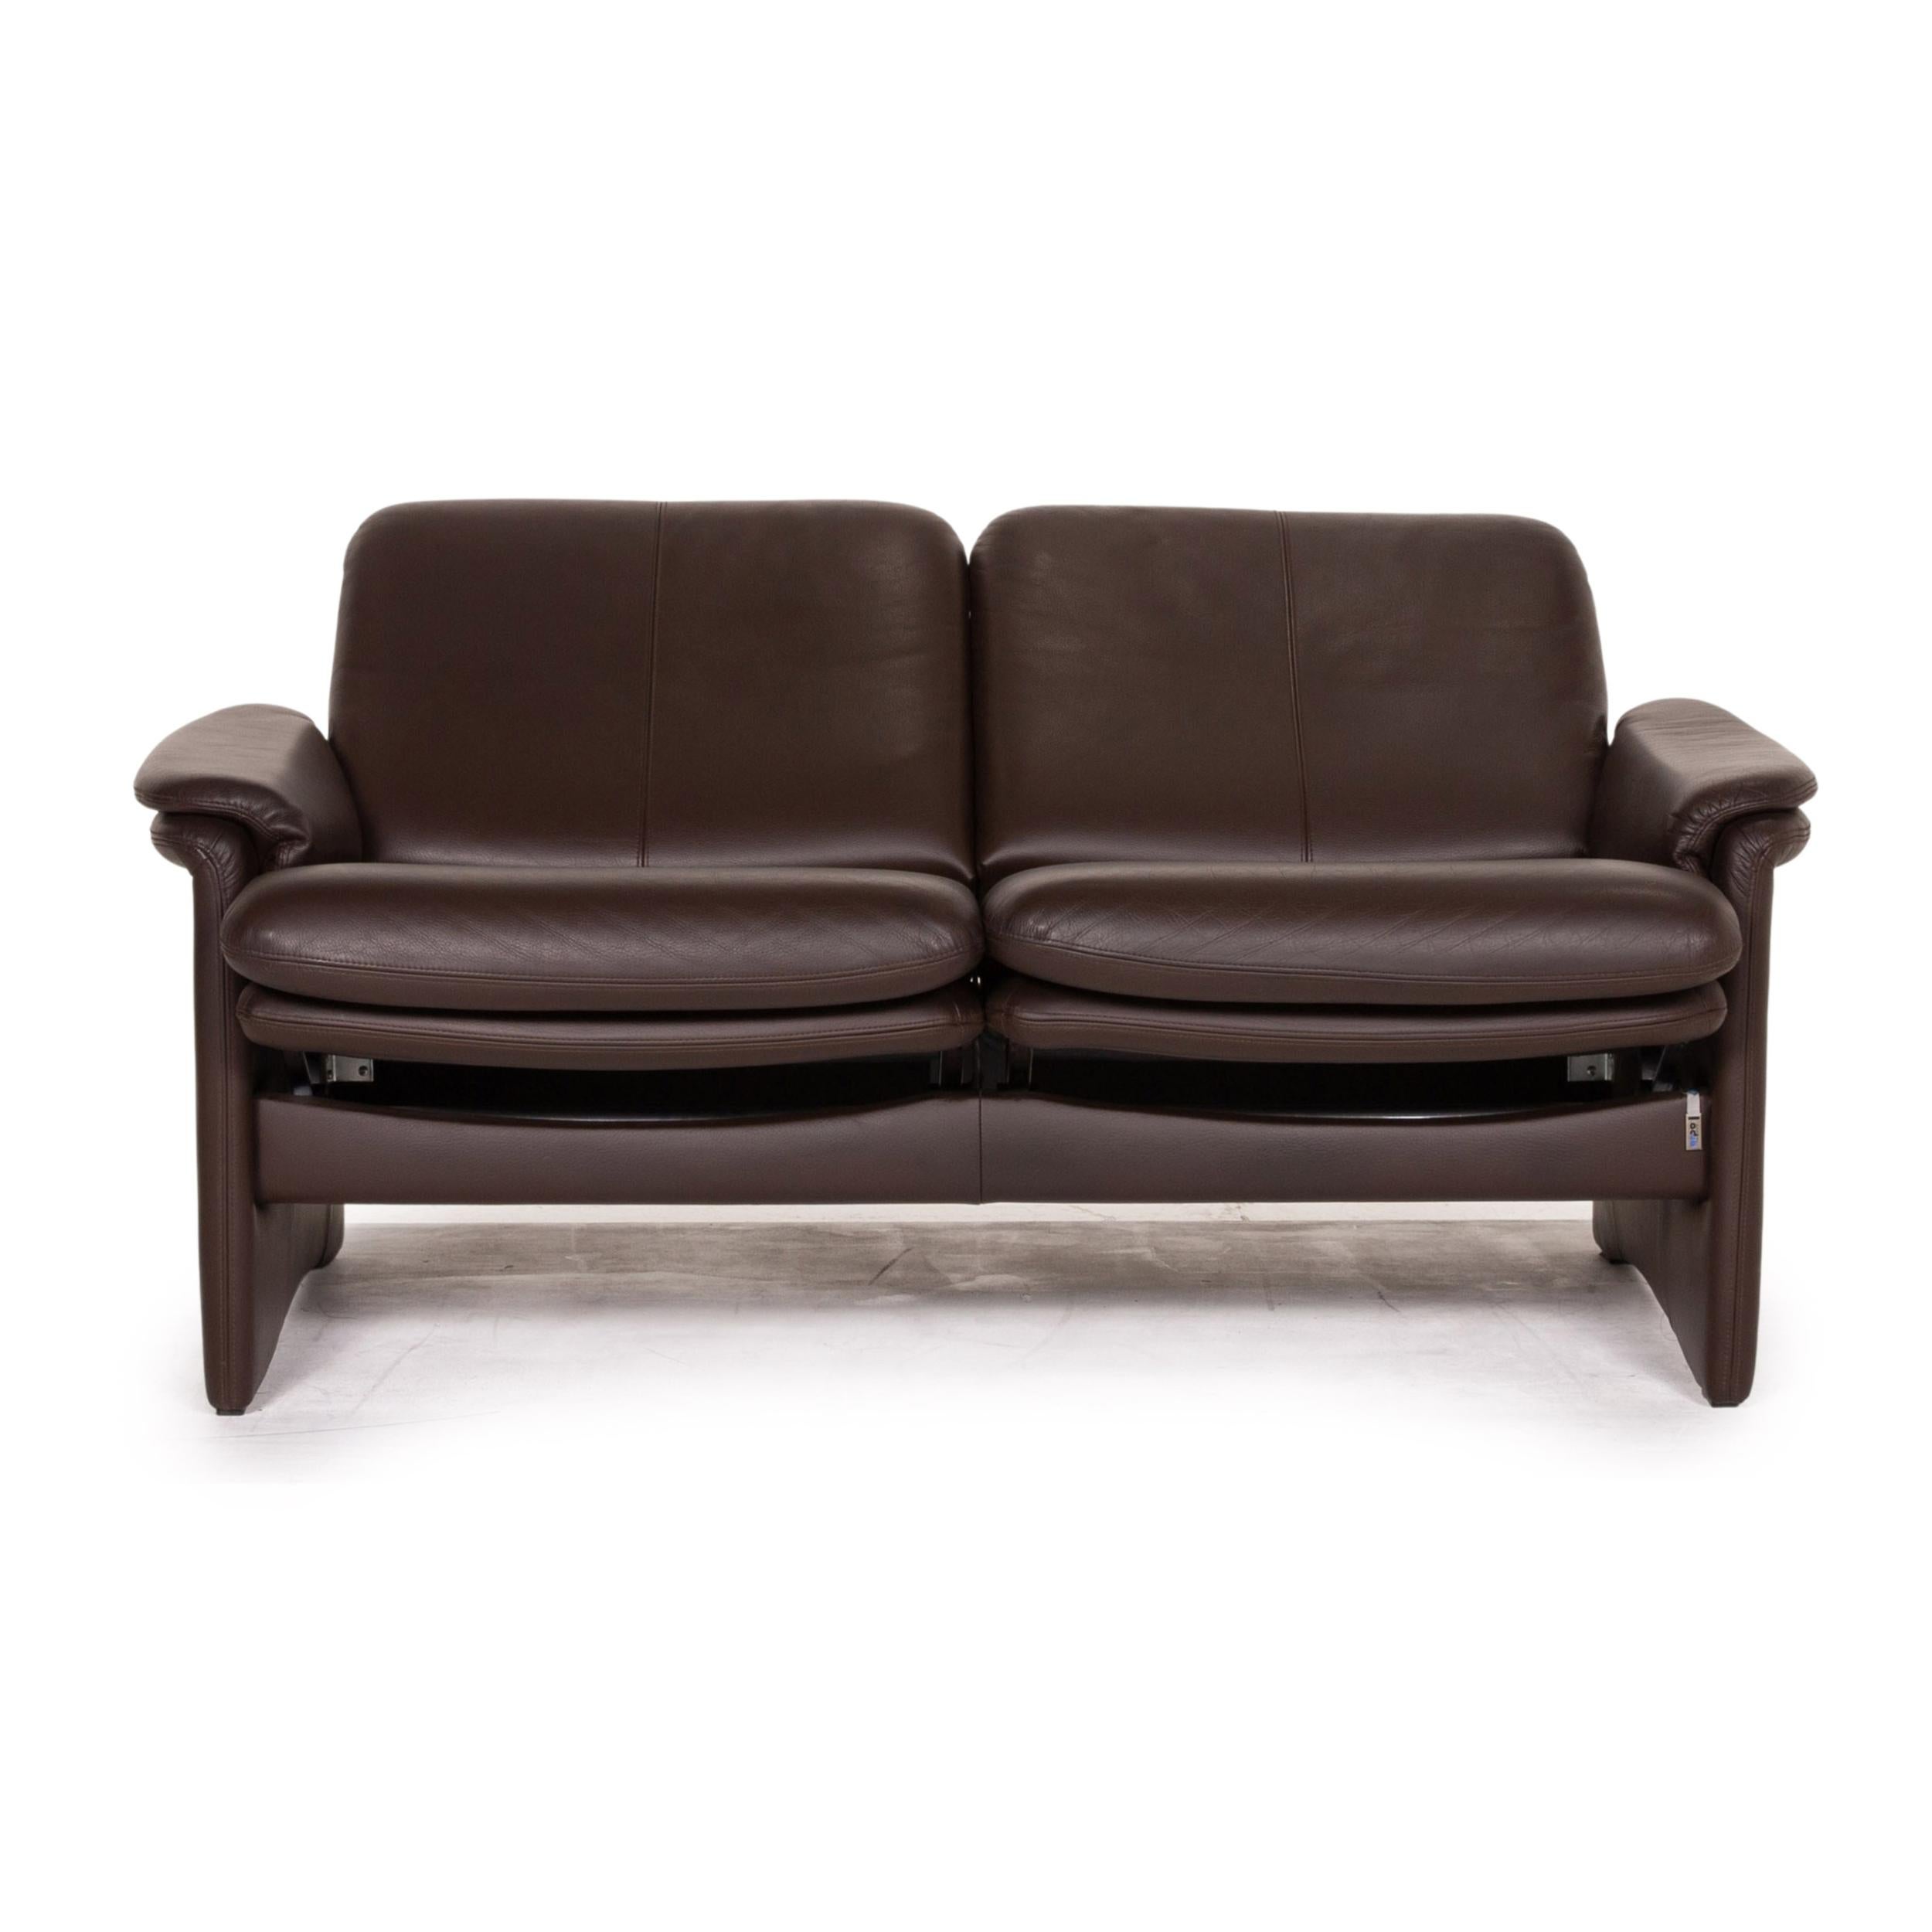 Modern Erpo City Leather Sofa Brown Dark Brown Two-Seat Couch For Sale